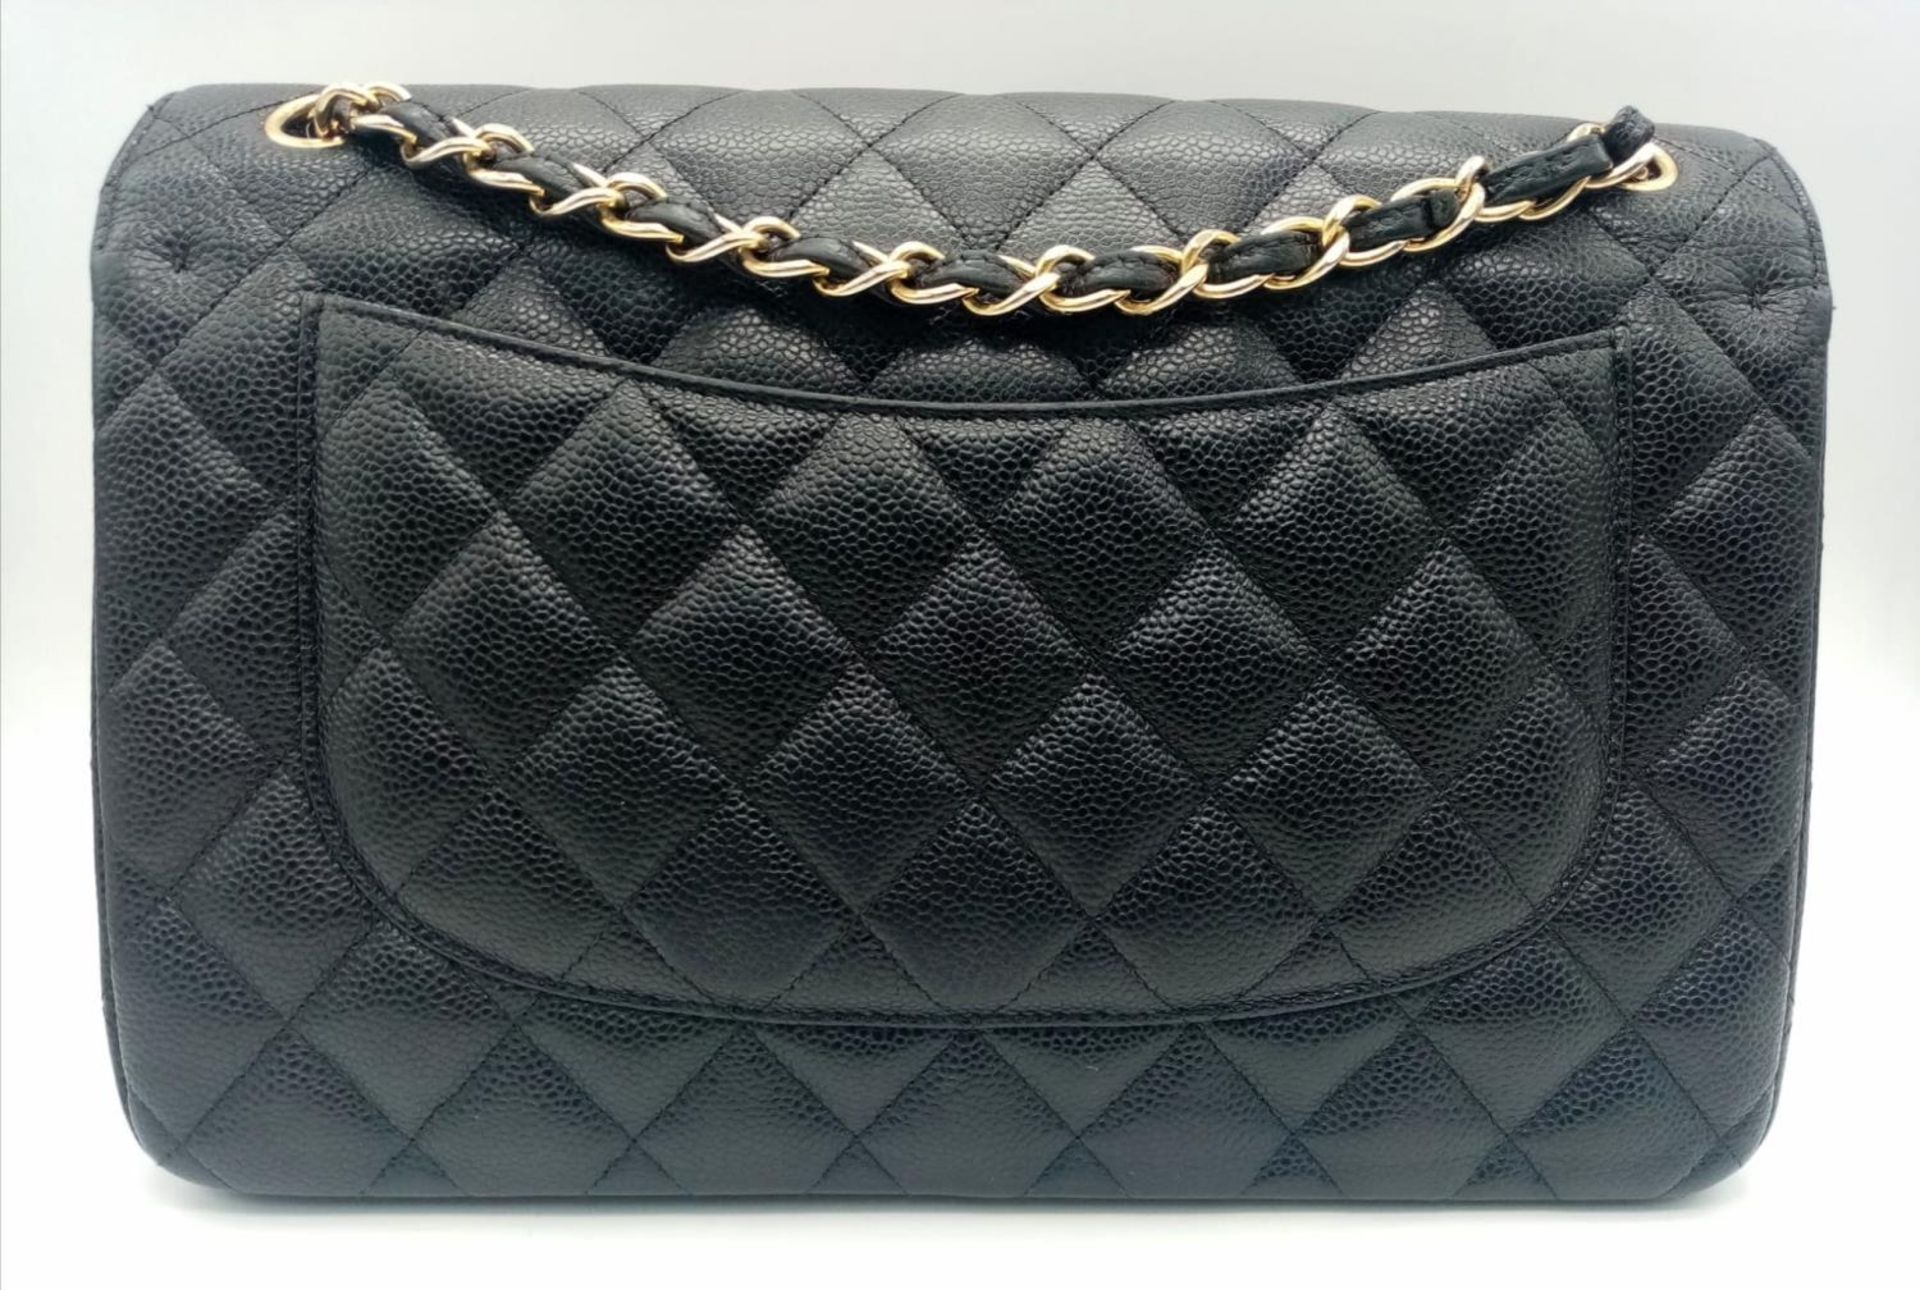 A Chanel Black Caviar Classic Double Flap Bag. Quilted pebbled leather exterior with gold-toned - Image 2 of 11